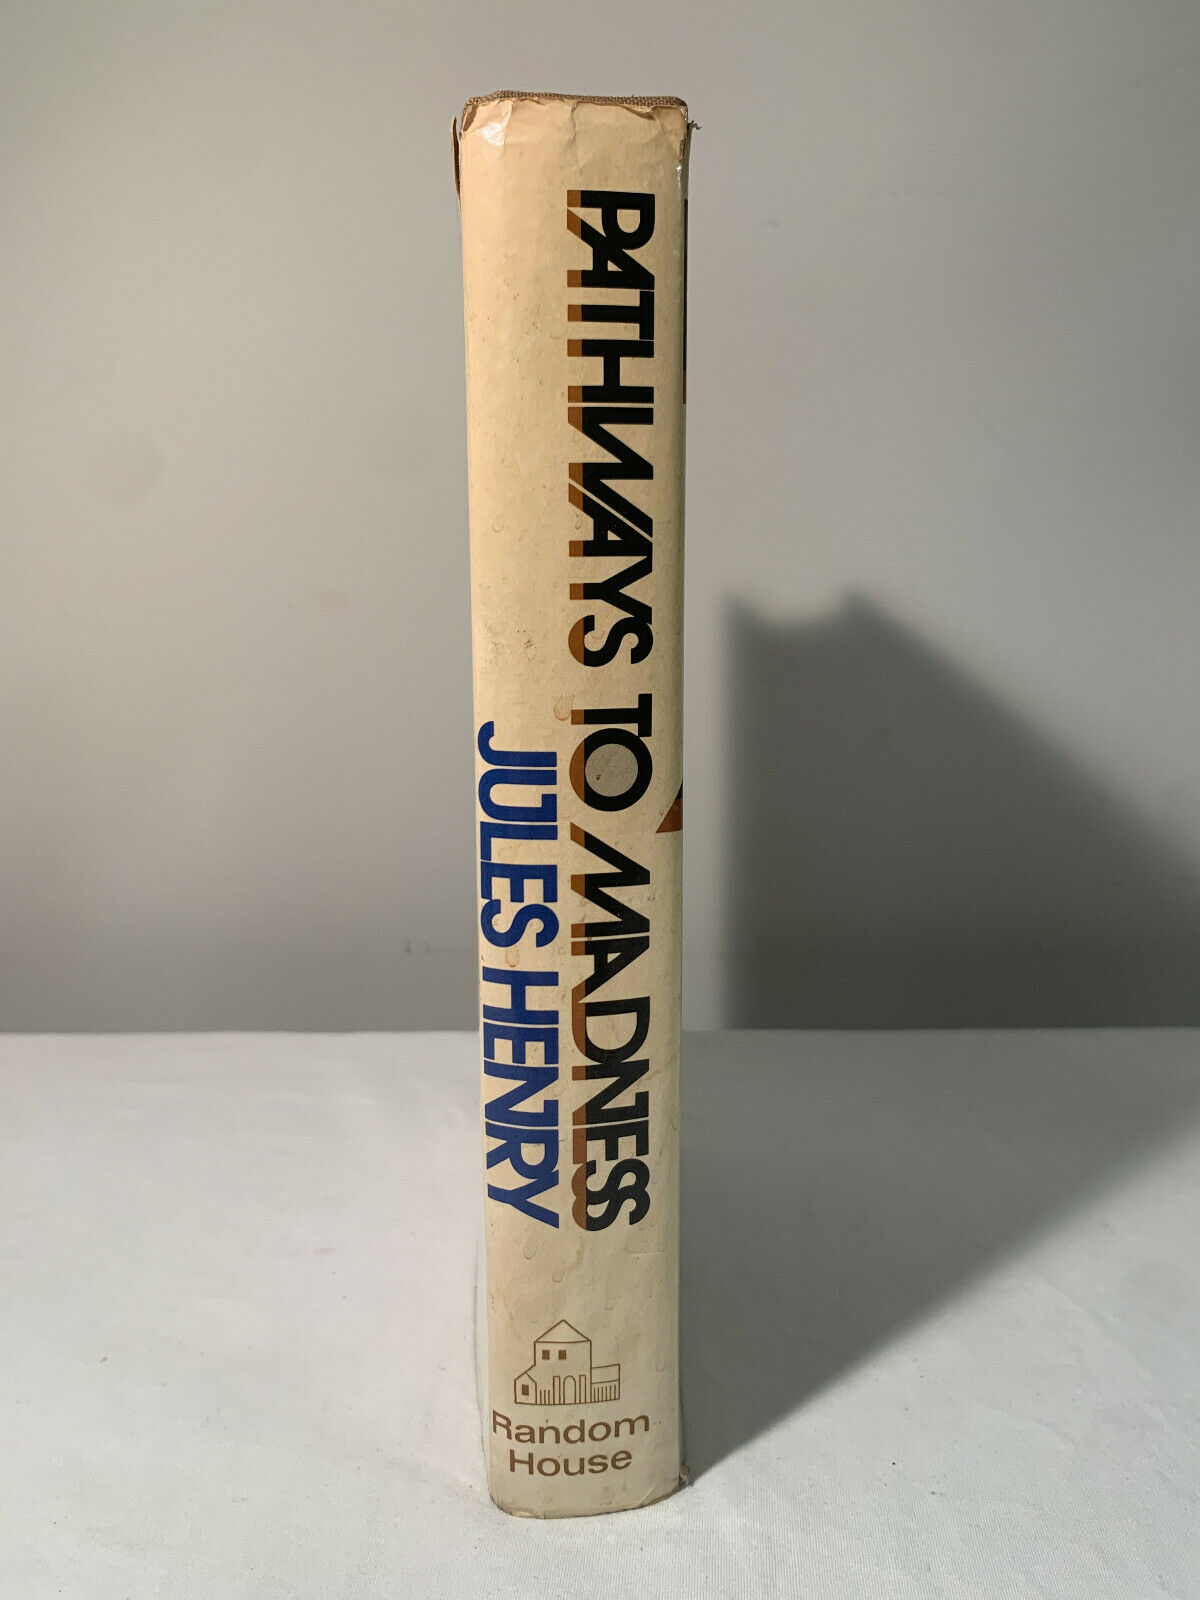 PATHWAYS TO MADNESS, Jules Henry (First Edition,1971), E5